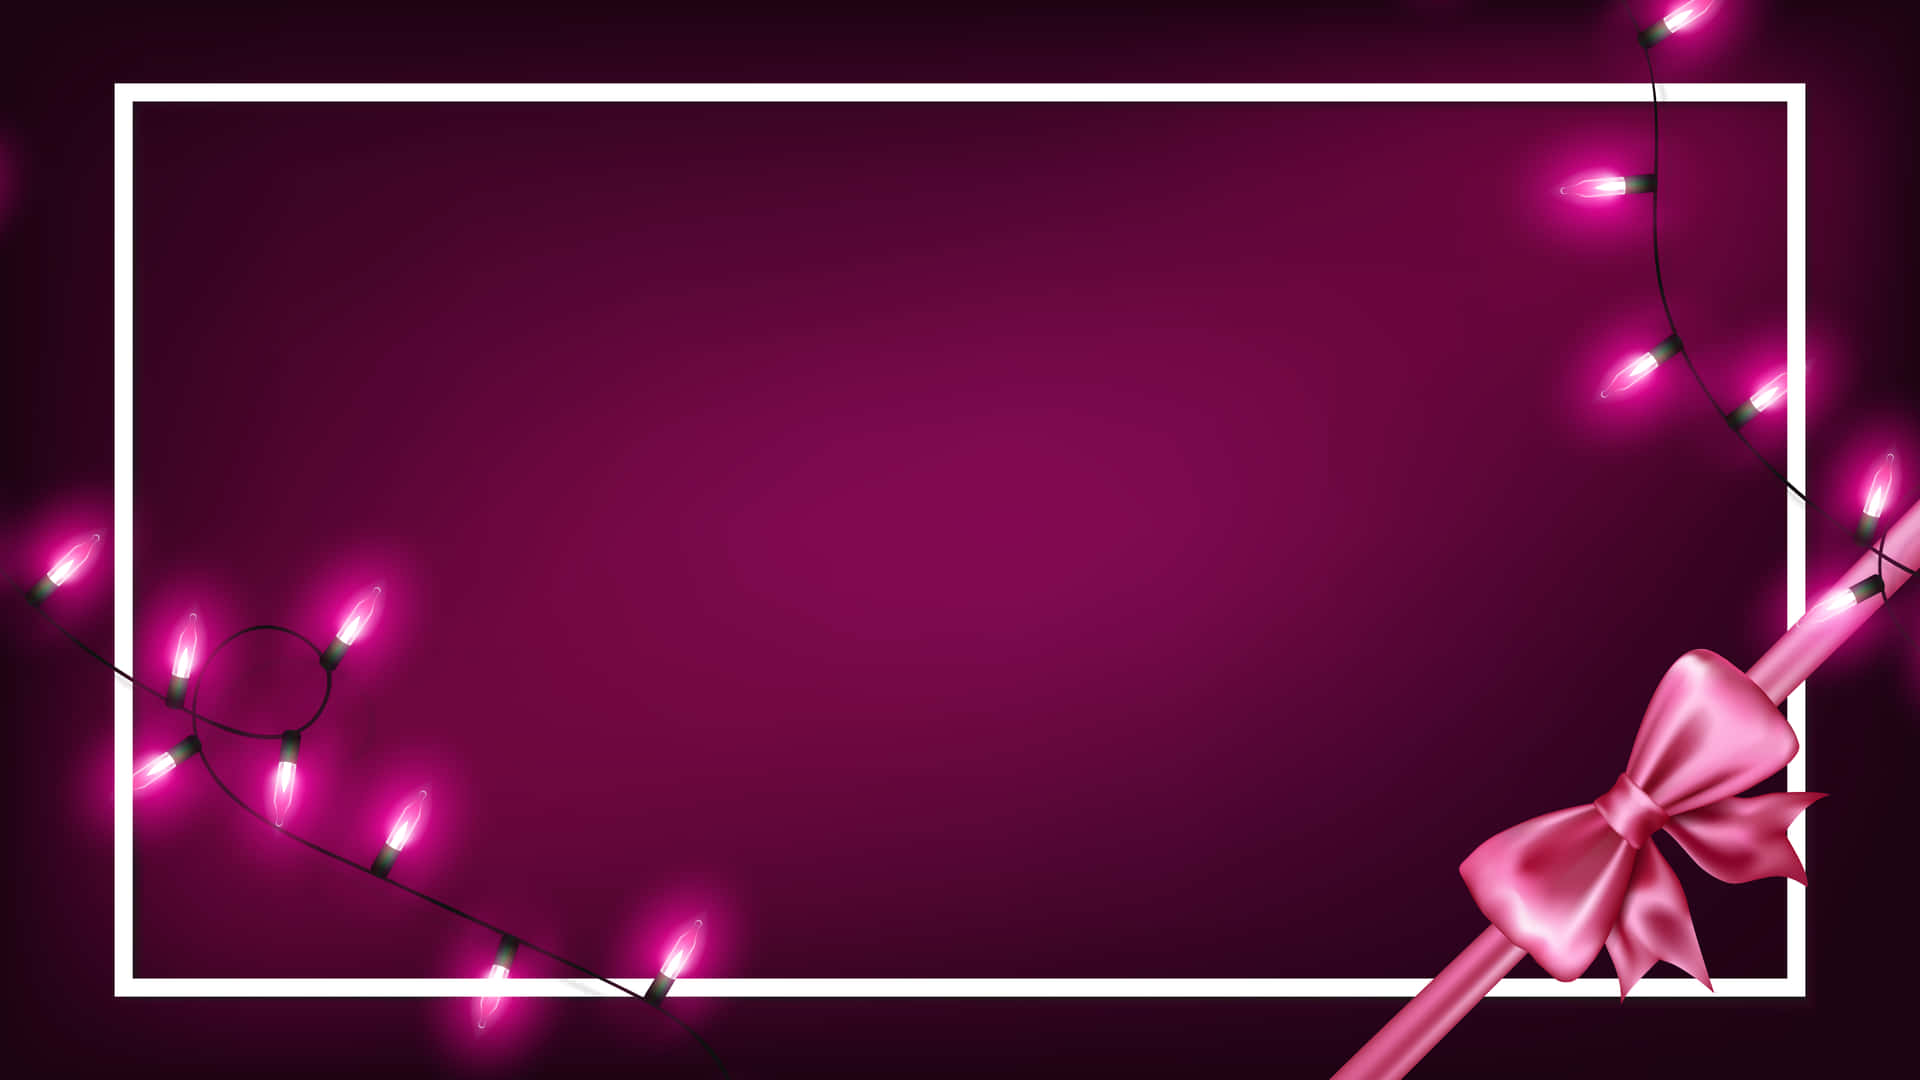 A Pink Frame With Lights And A Bow Wallpaper